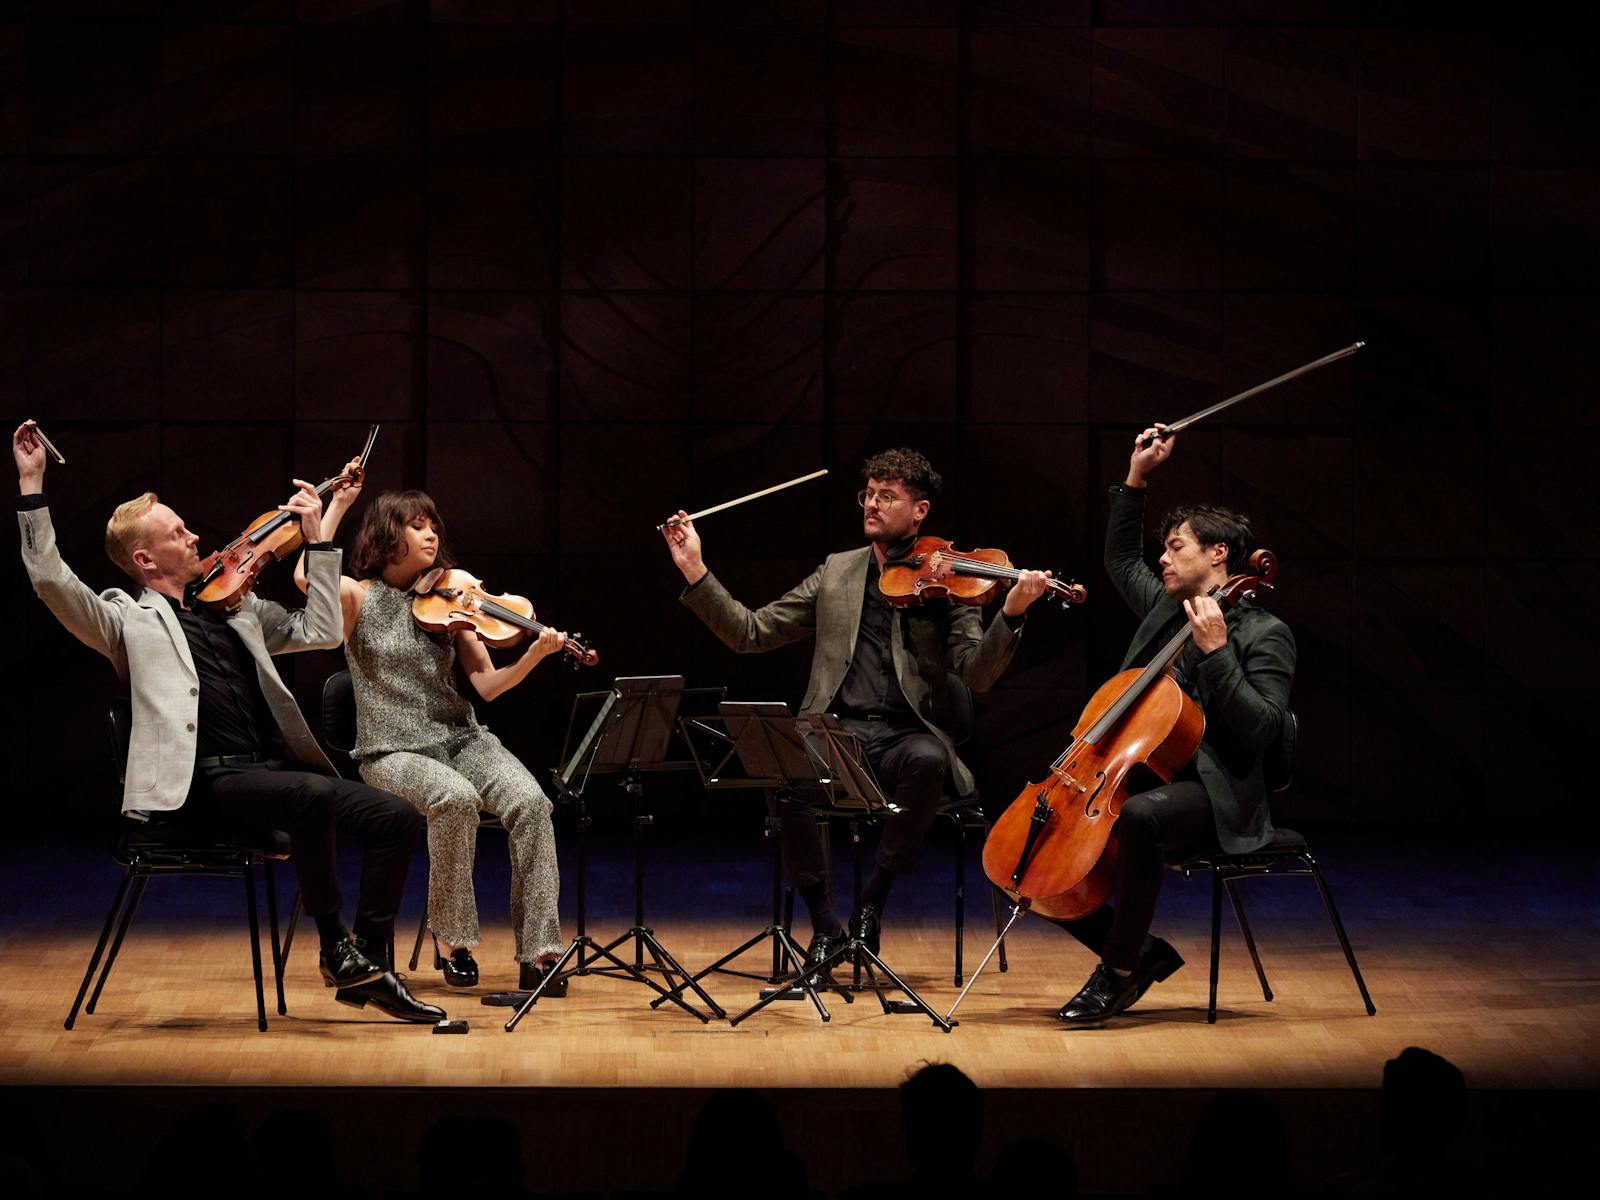 A string quartet in a spotlight on a drkened stage